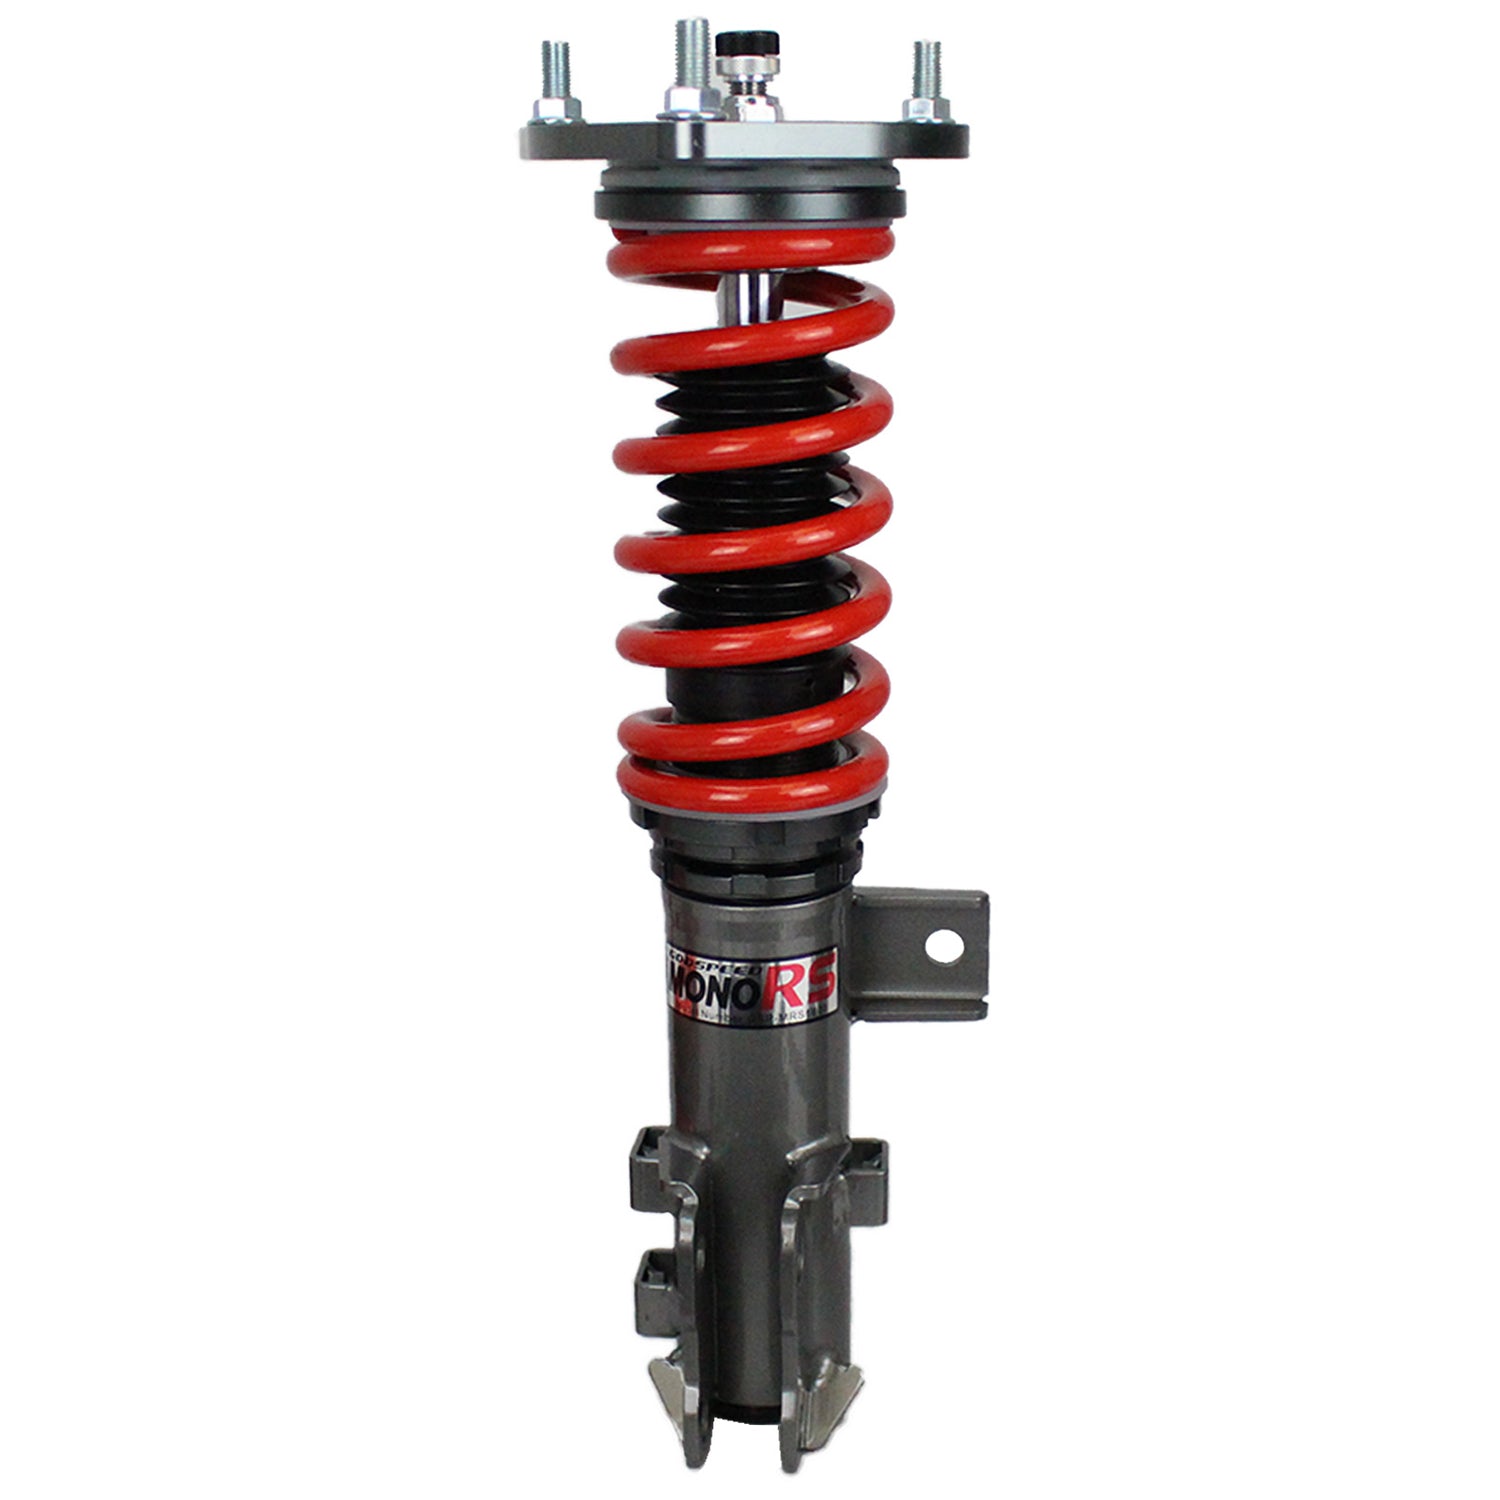 Godspeed MRS1800-A MonoRS Coilover Lowering Kit, 32 Damping Adjustment, Ride Height Adjustable